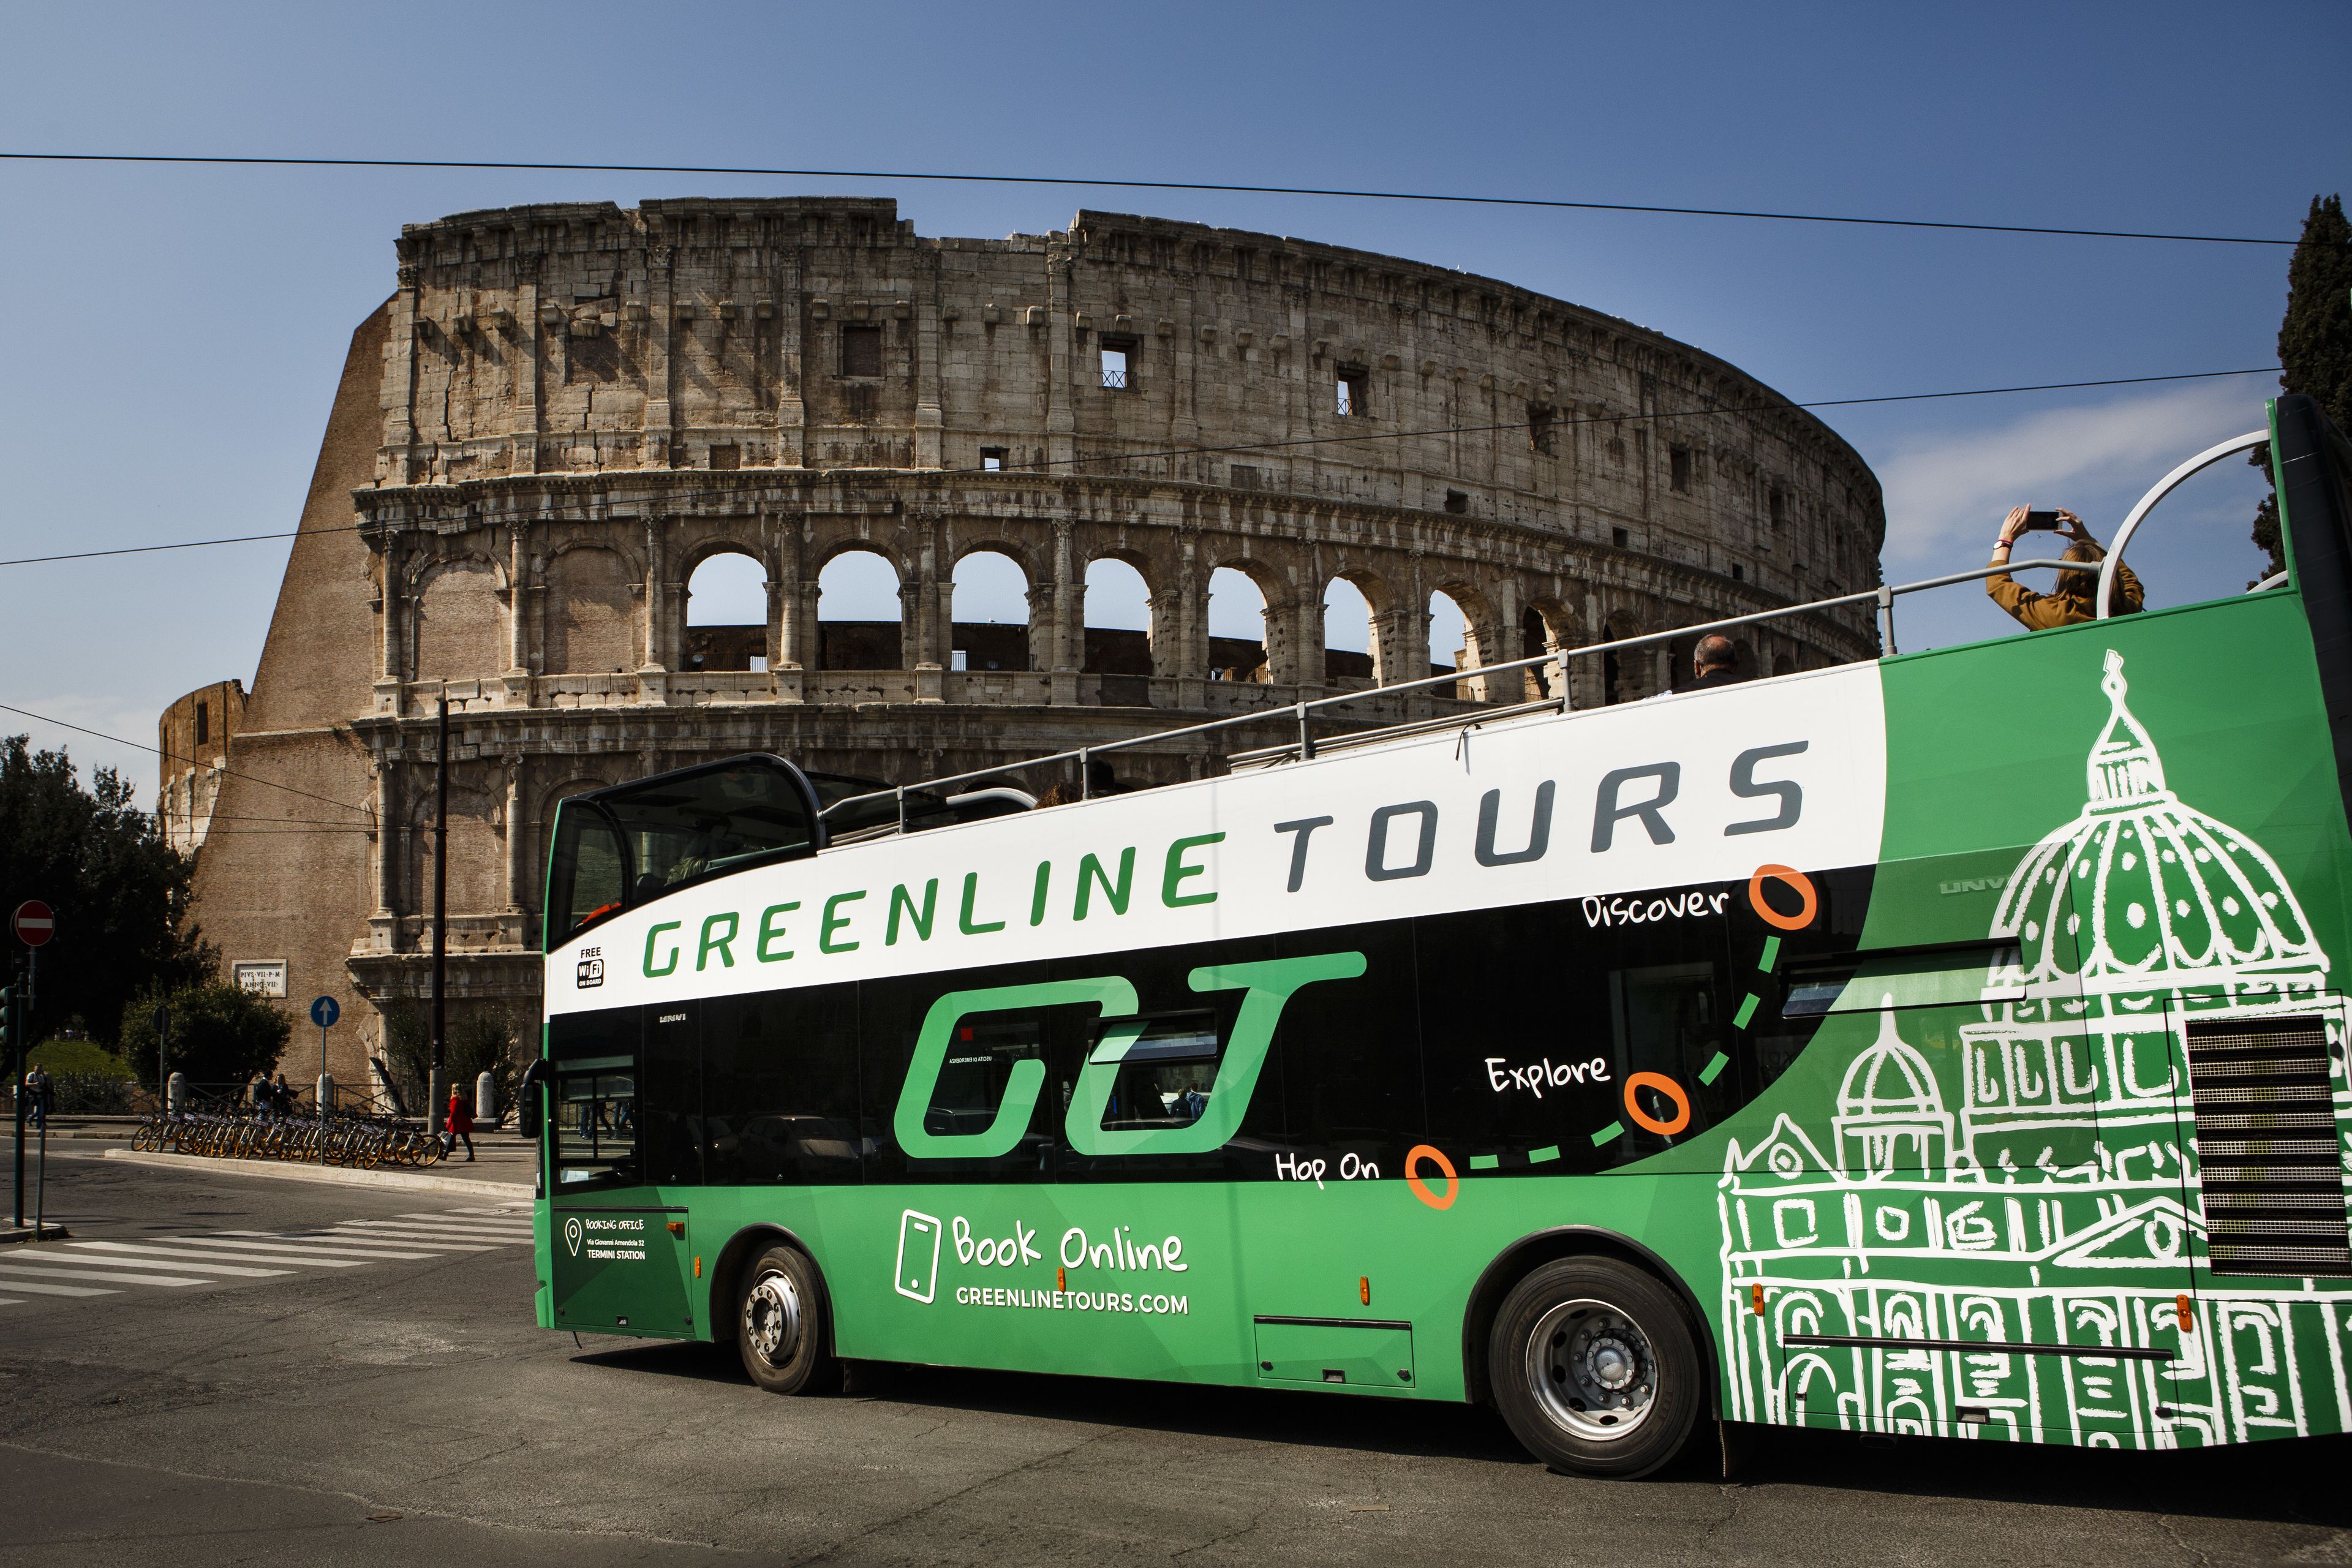 bus tour packages in rome